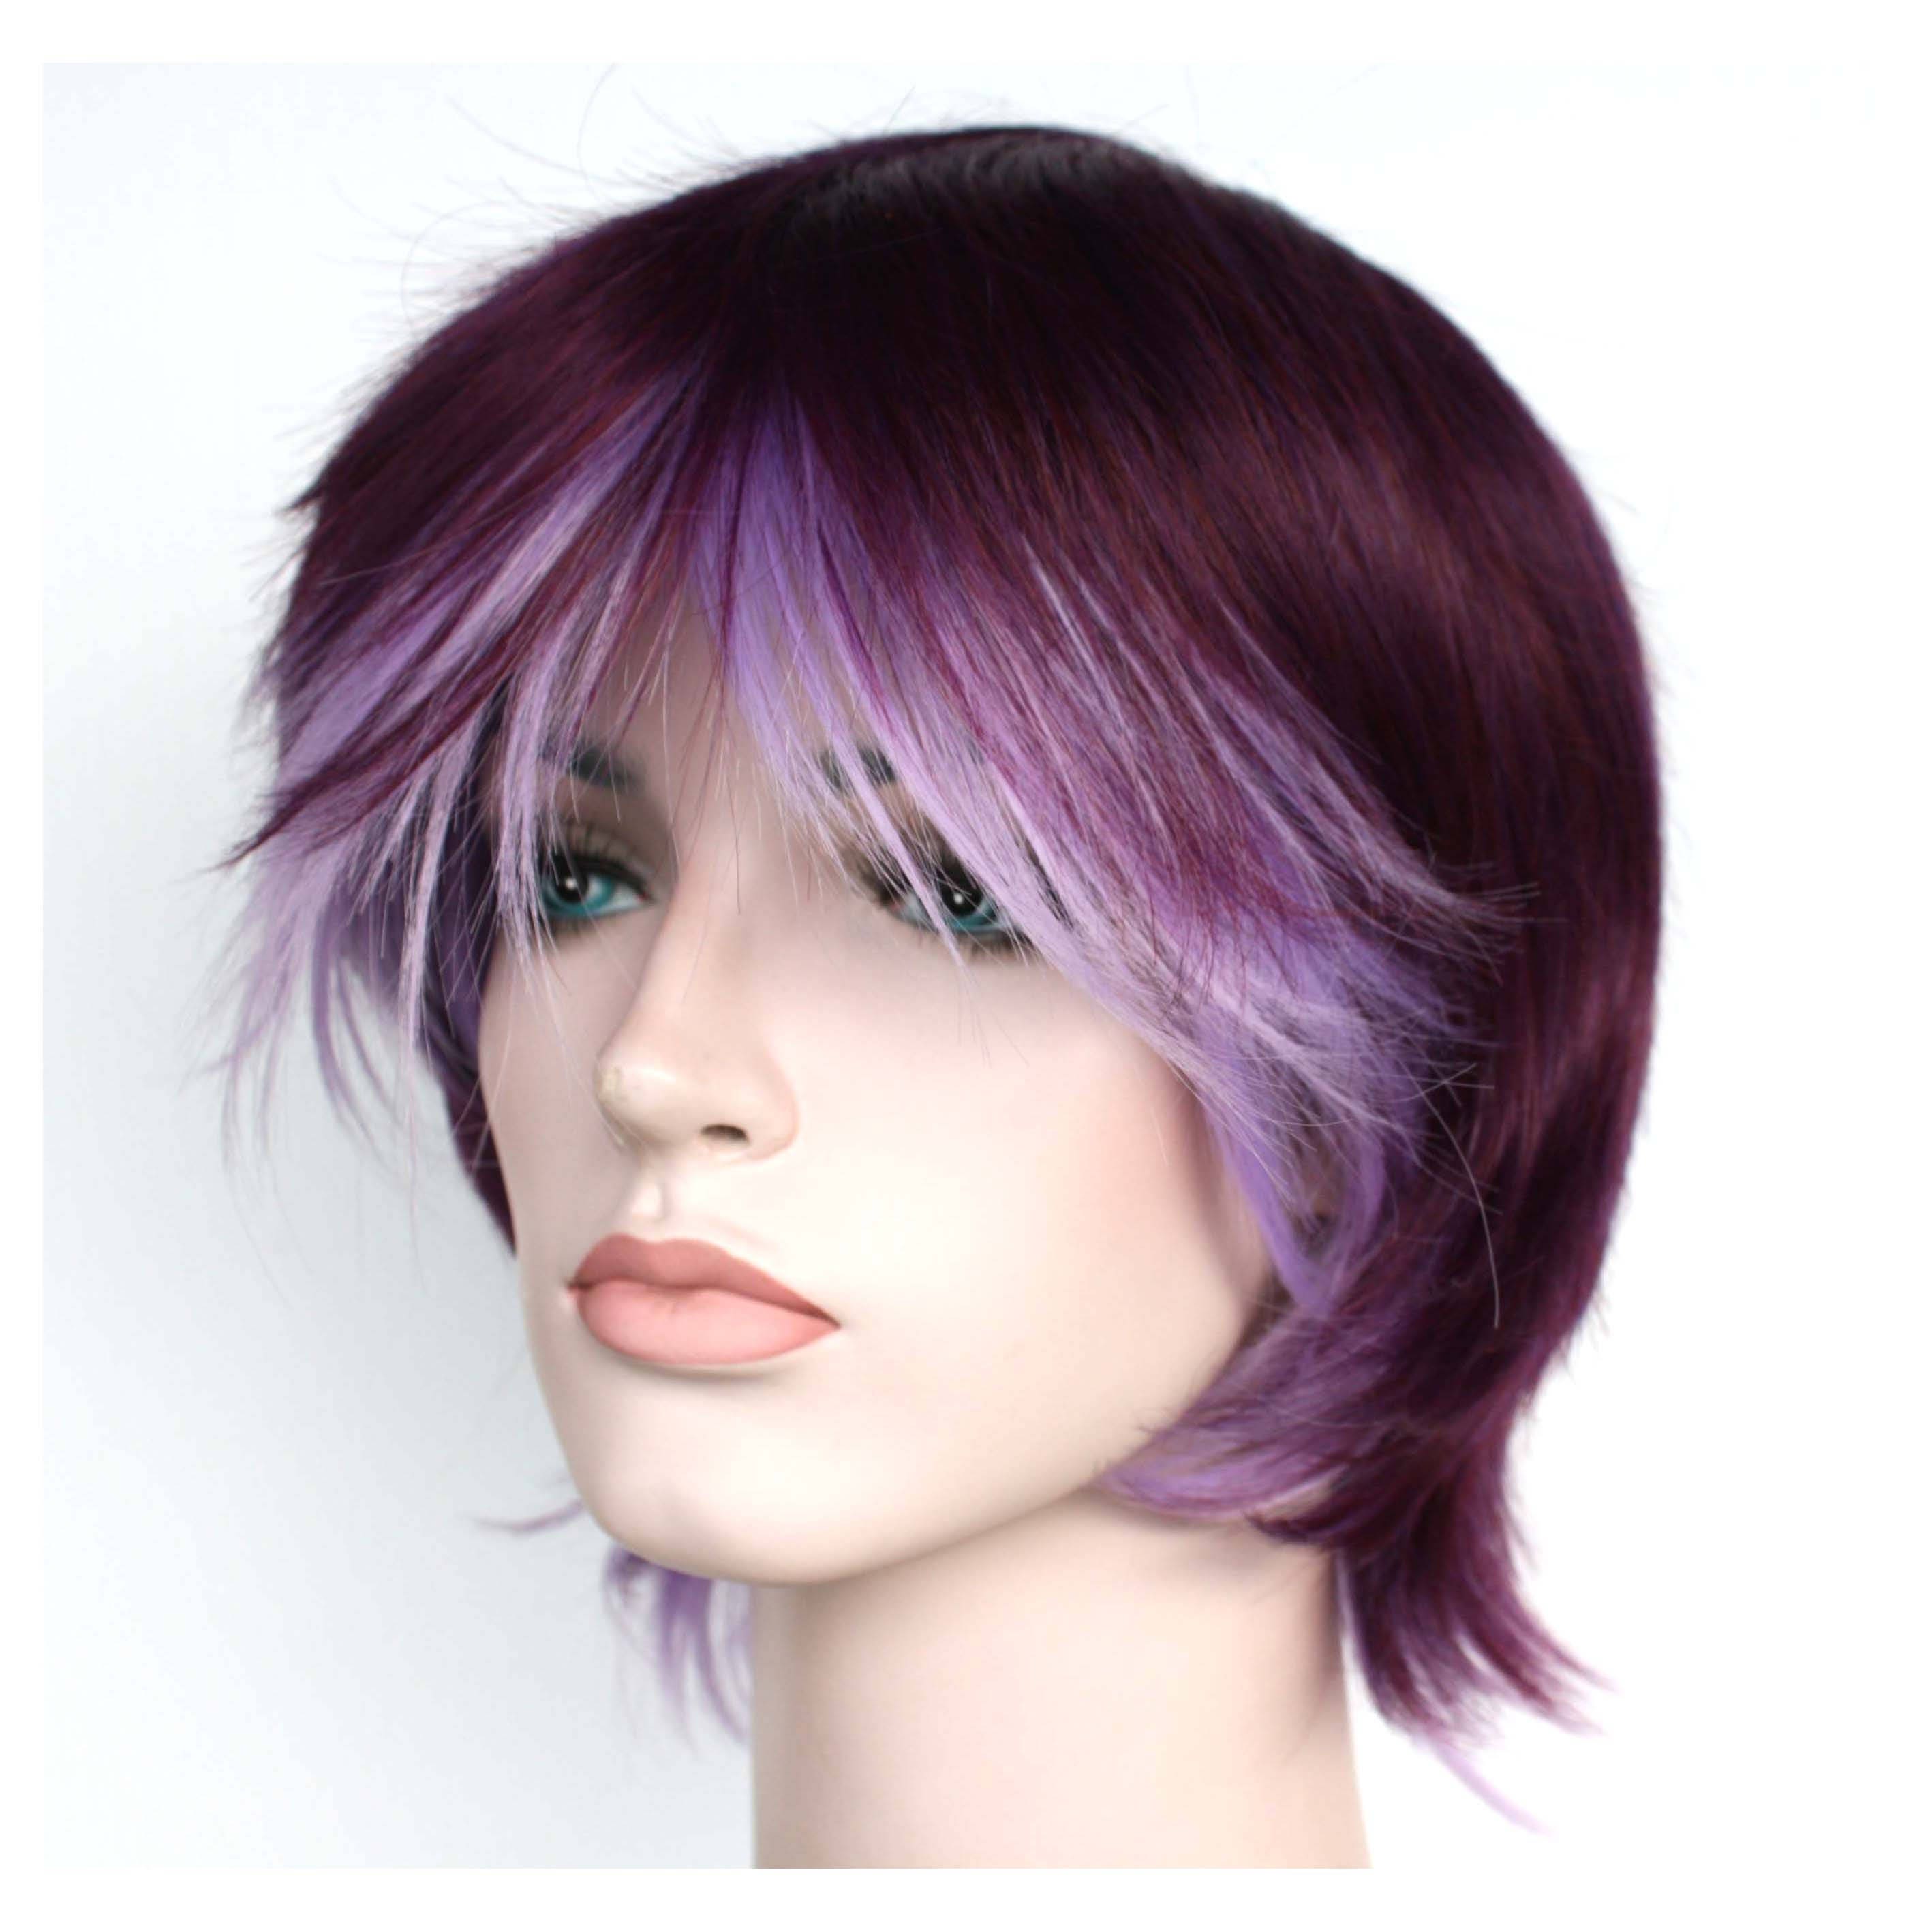 11'' Short Messy Spiky Bellflower Purple Synthetic Cosplay Wig NEW